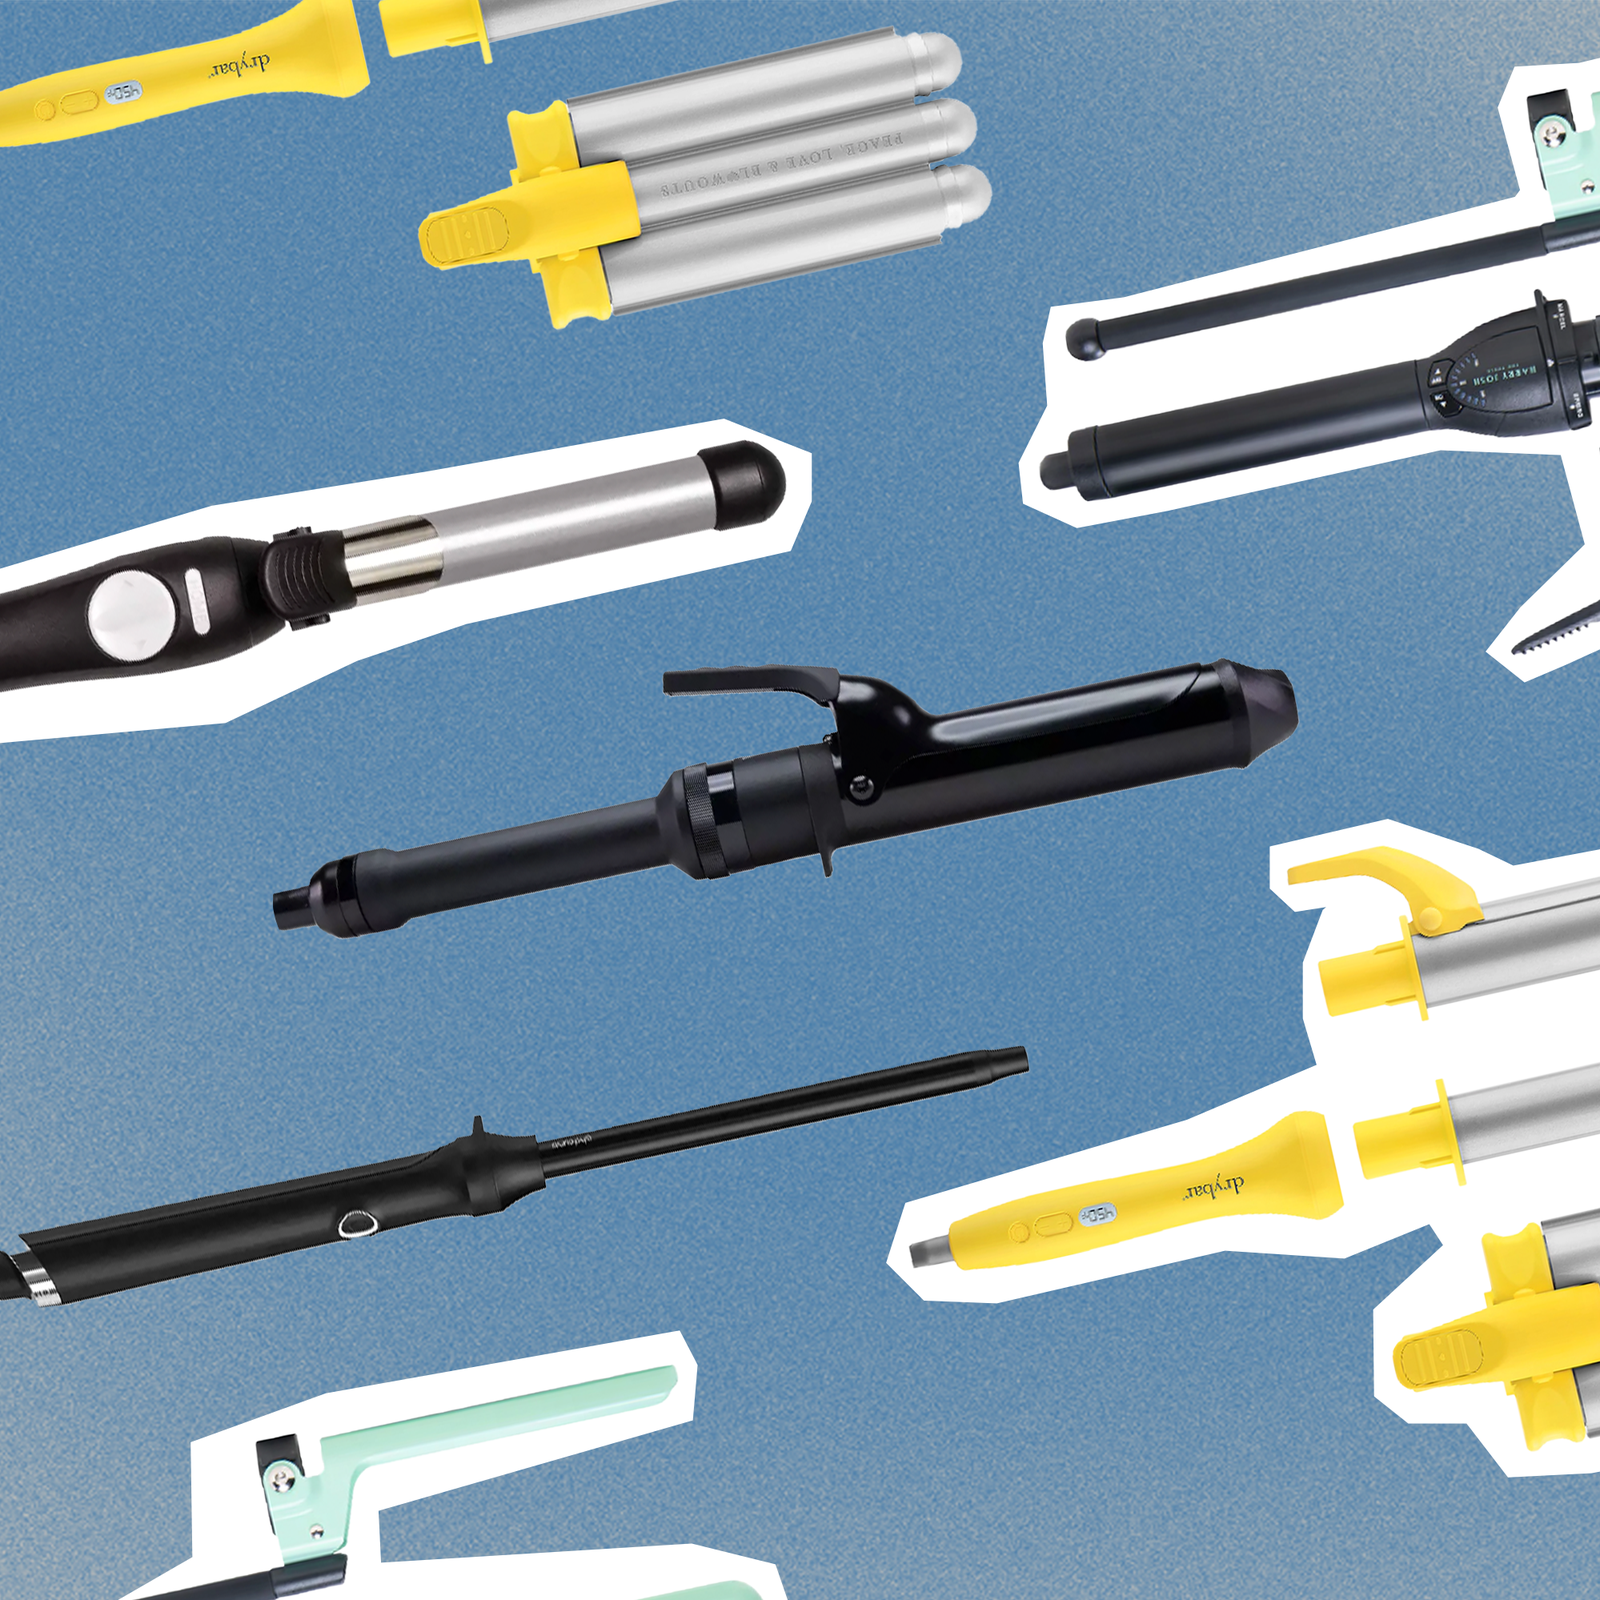 16 Foolproof Curling Irons for People Who Can’t Curl Their Hair